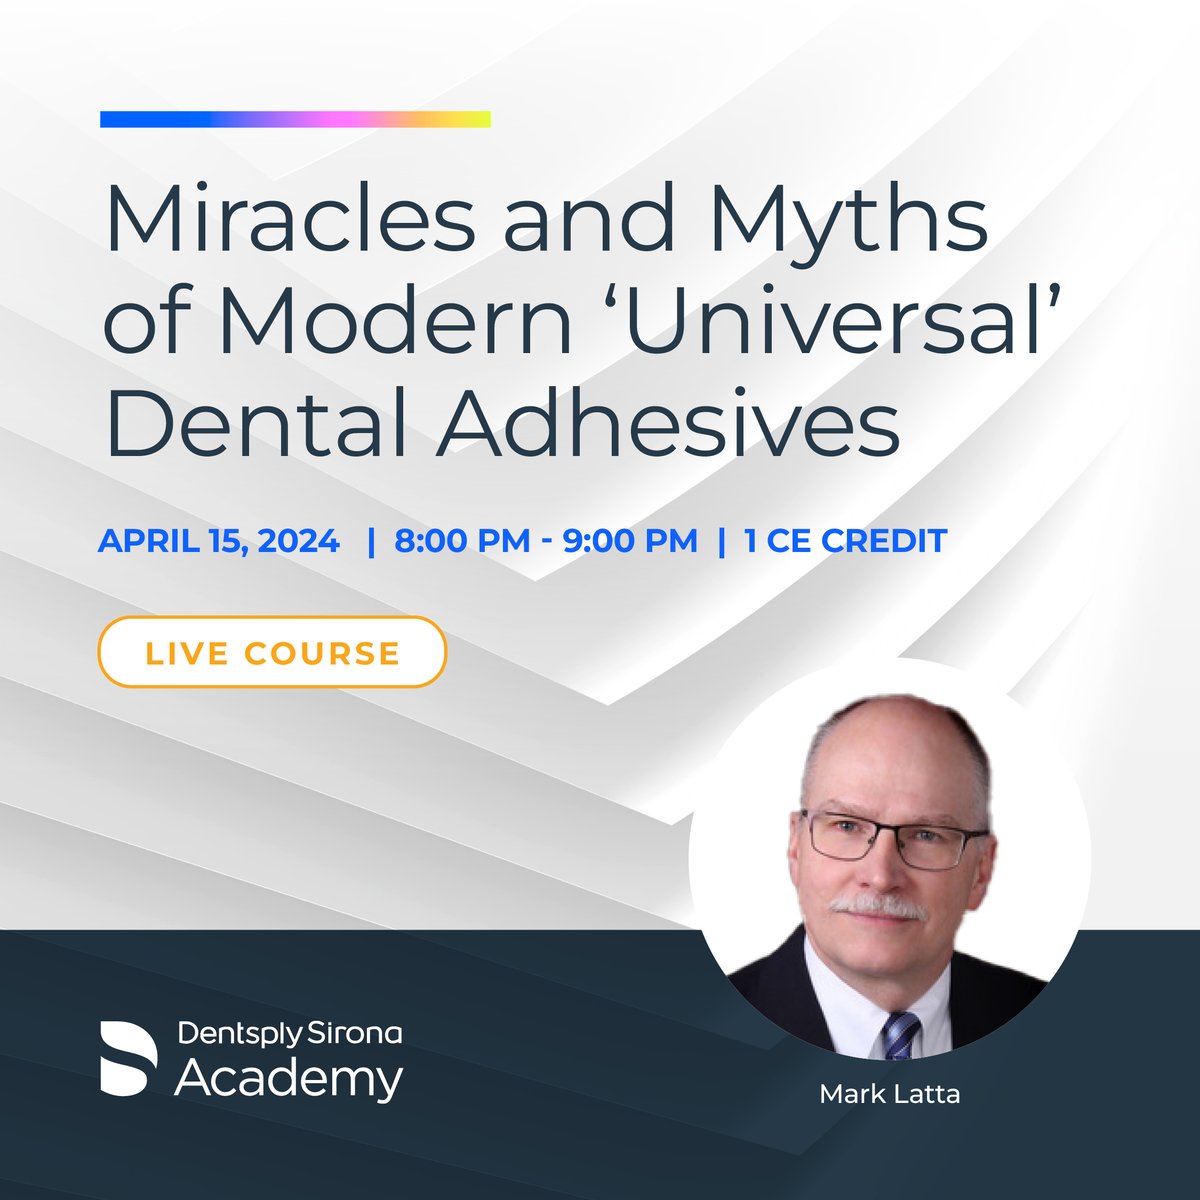 Join Dr. Mark Latta on Monday, April 15, 2024 as he discusses Miracles and Myths of Modern 'Universal' Dental Adhesives and earn 1 CE! Register Today: ms.spr.ly/6014cmyqG